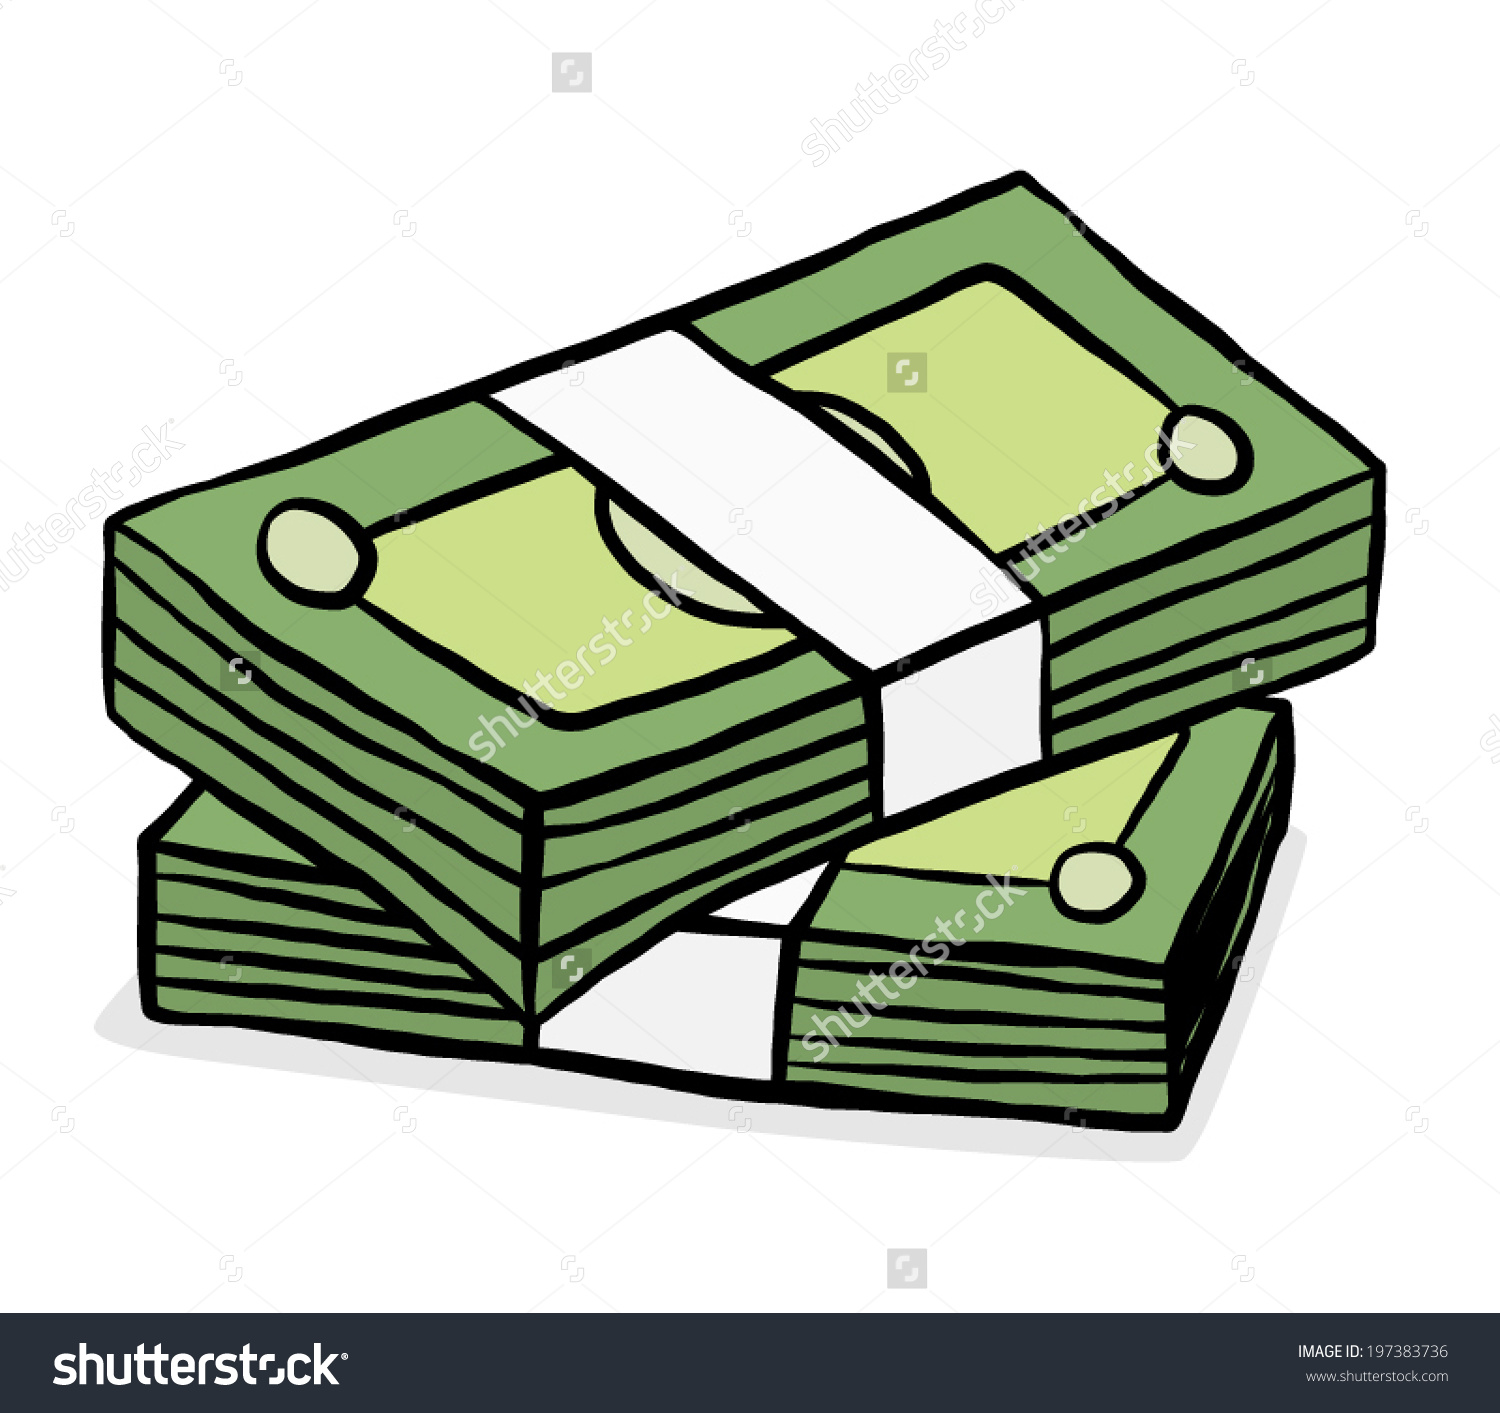 banknotes clipart - photo #8